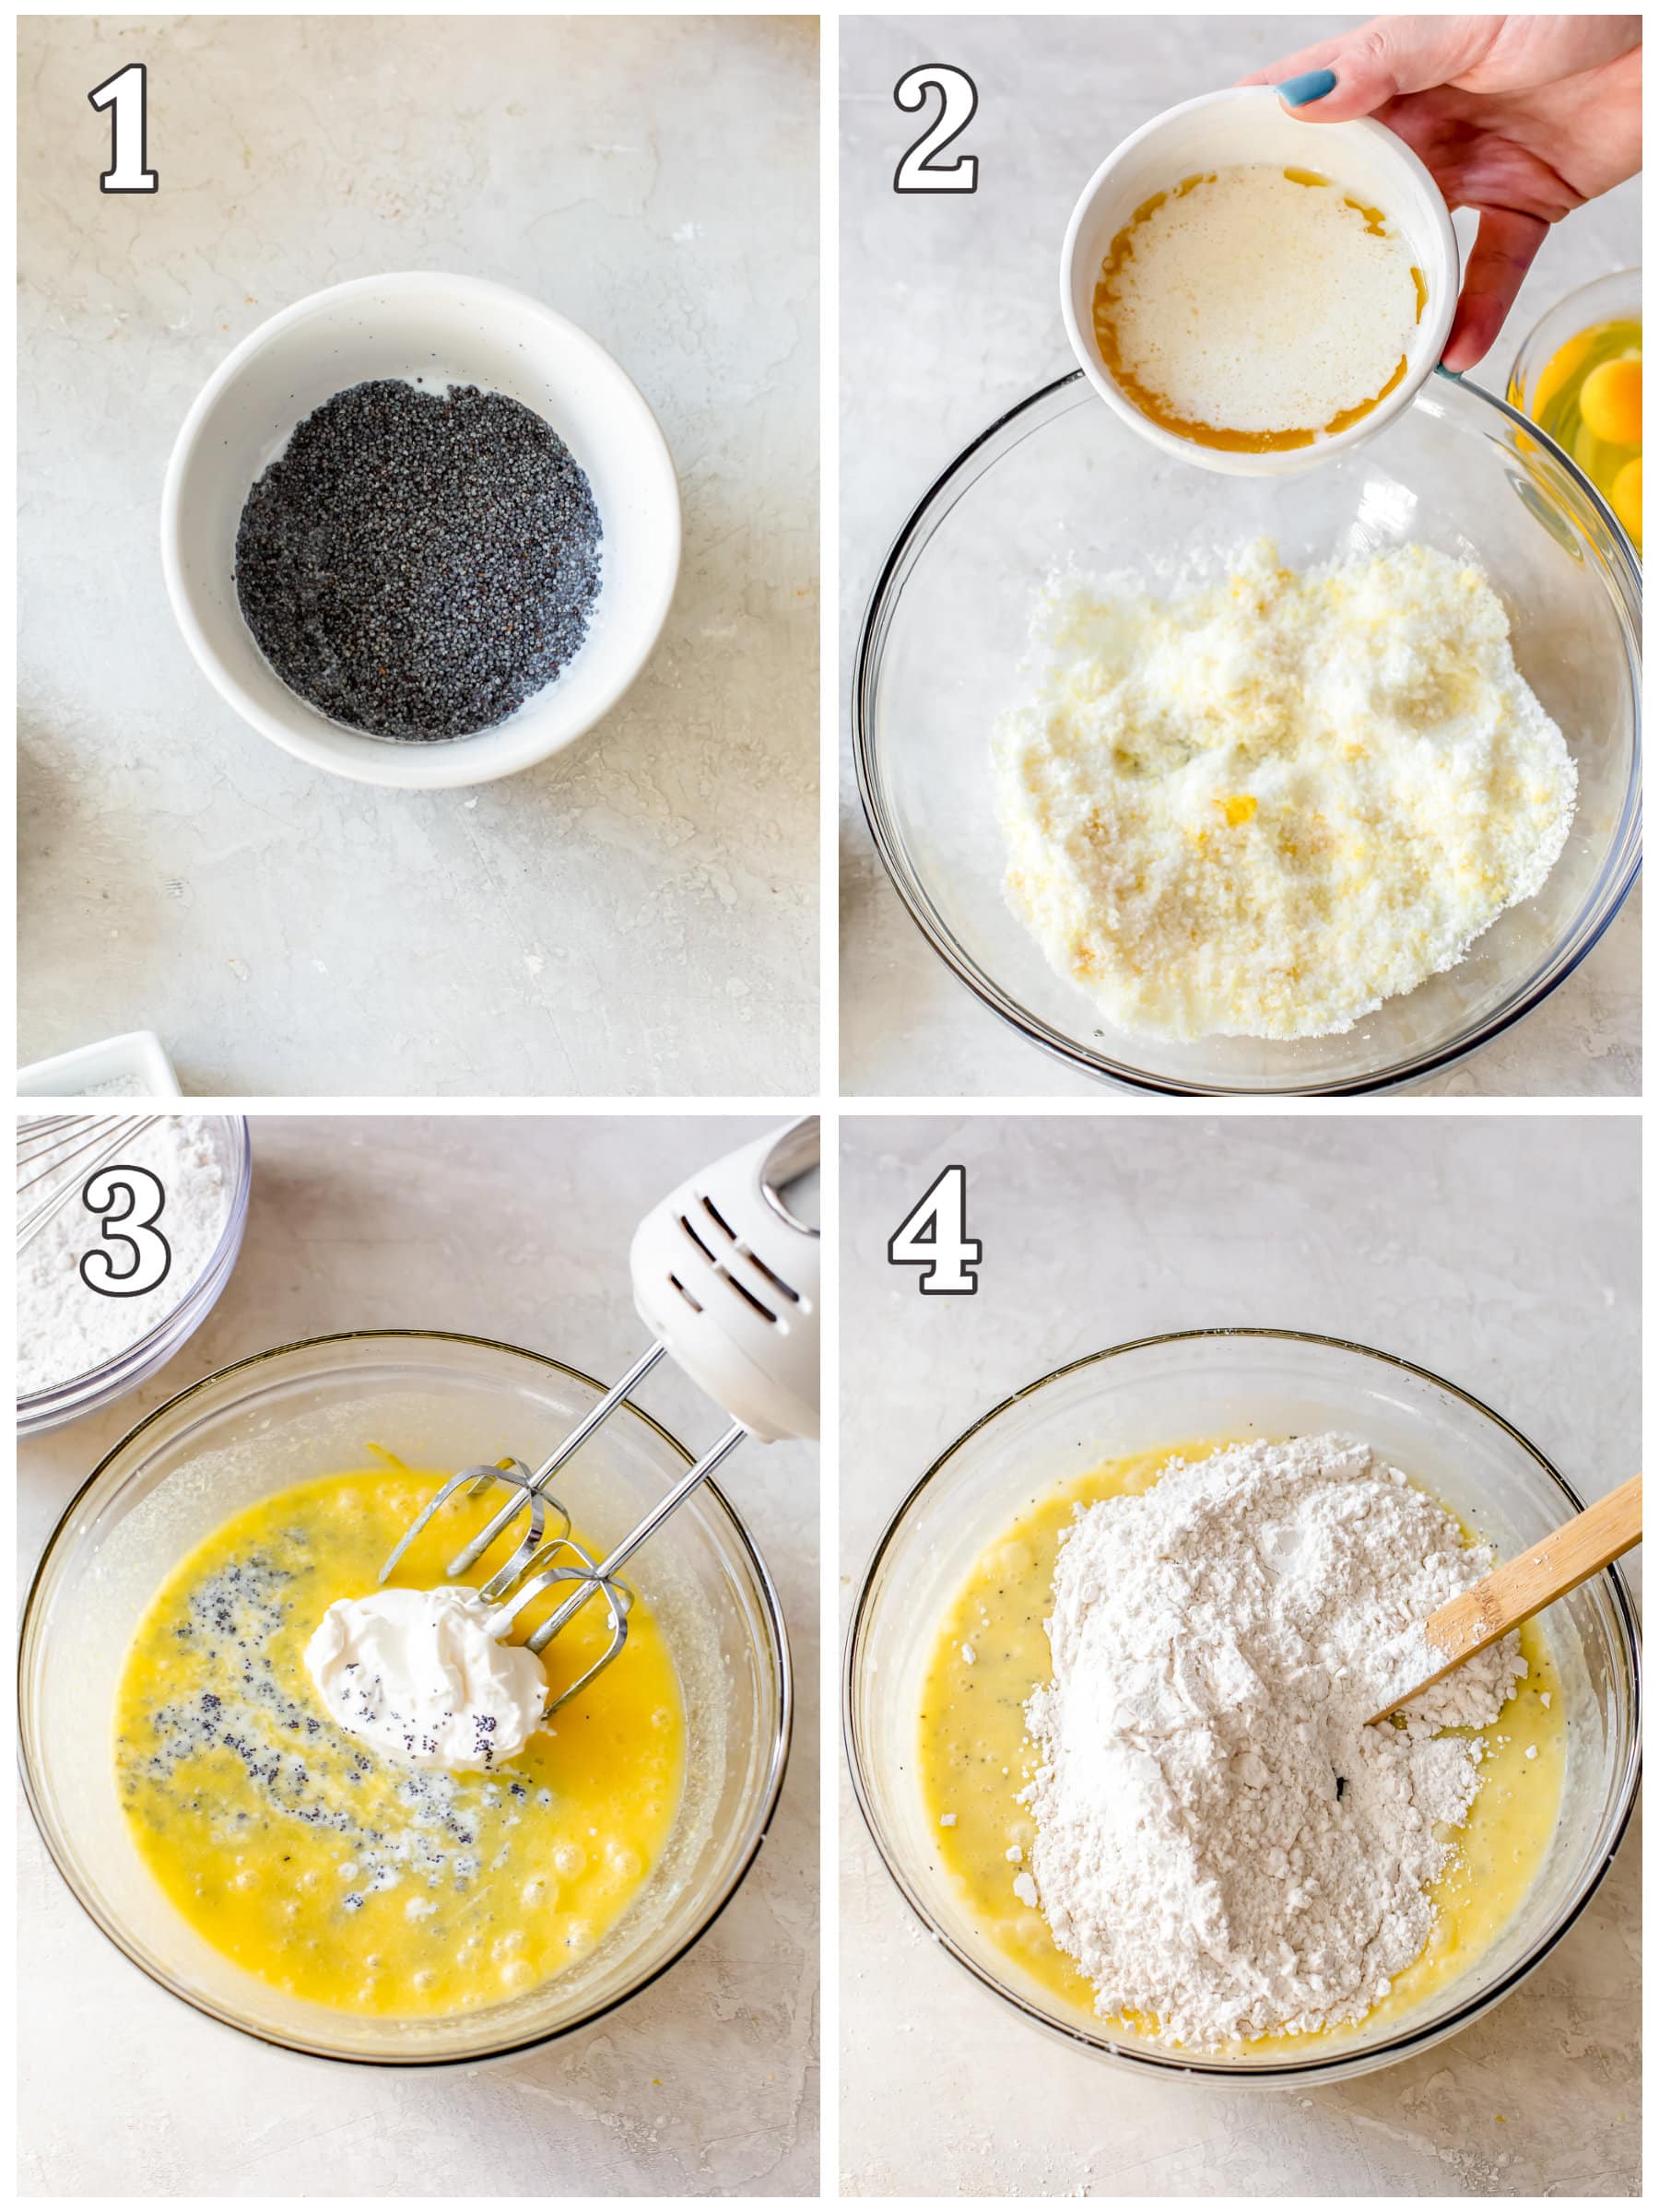 photo collage demonstrating how to make lemon poppy seed bread in a mixing bowl.